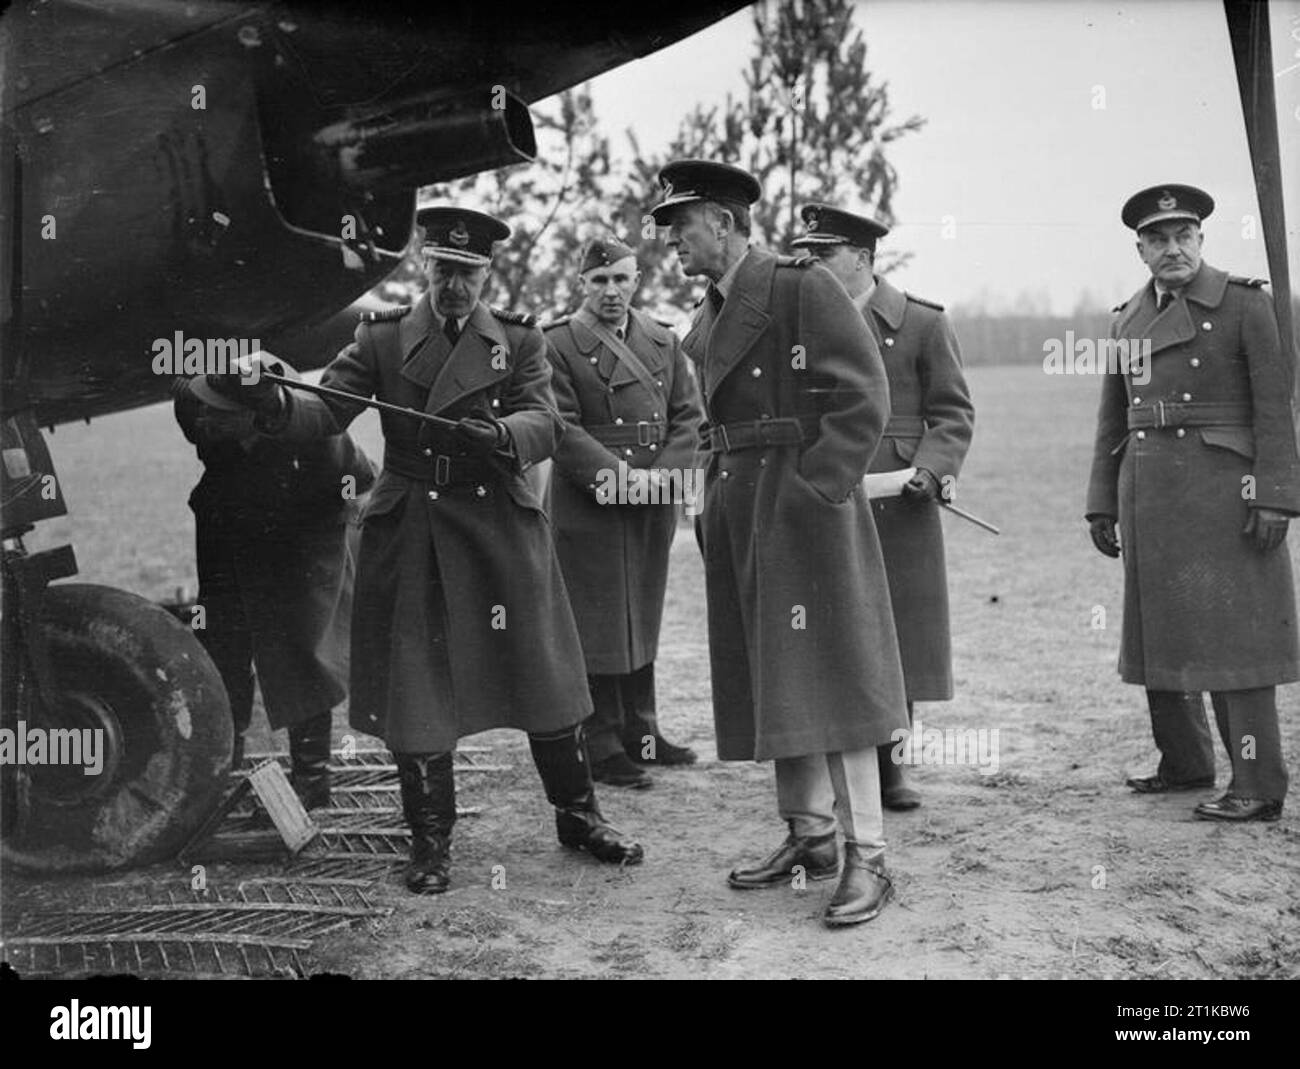 Royal Air Force- France 1939-1940. The Chief of the Air Staff, Air Chief Marshal Sir Cyril Newall (second from left), inspects a Fairey Battle at an airfield in France, accompanied by Air Commodore Lord Londonderry (fourth from left) and Air Vice Marshal P H L Playfair, Air Officer Commanding the Advanced Air Striking Force (far right). Stock Photo